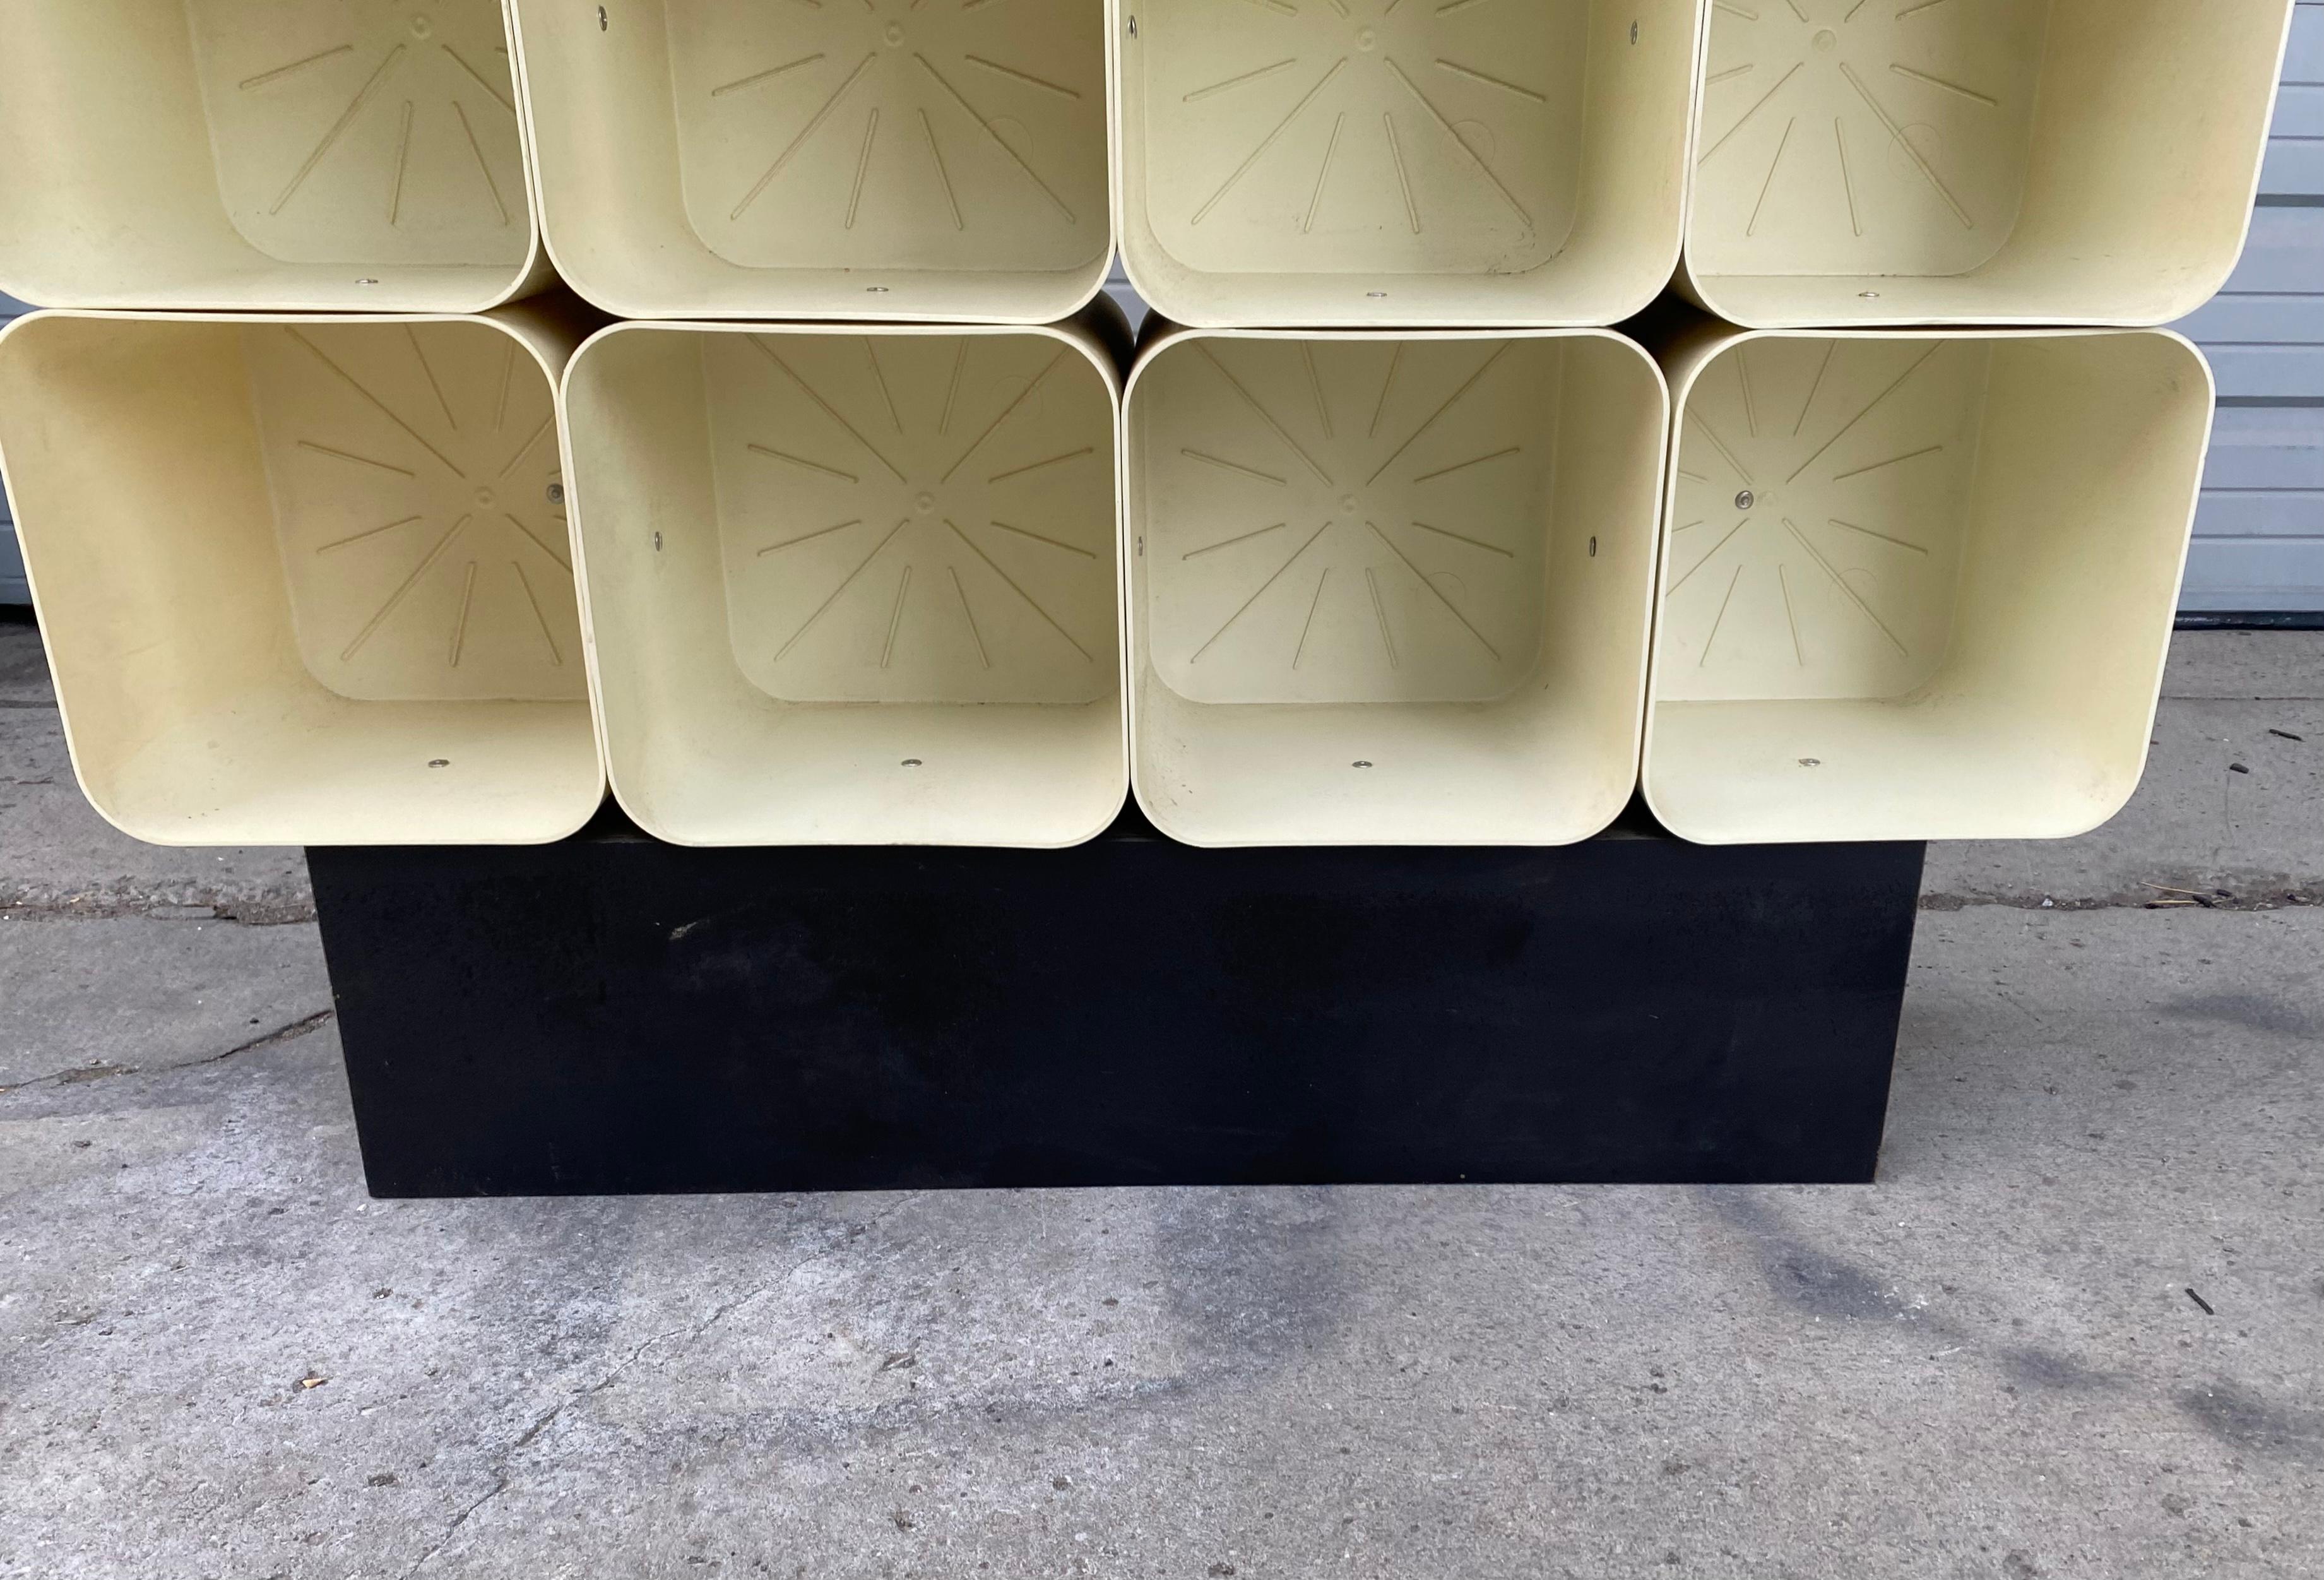 Custom U. T. Kartell Modular Storage / cubbies / bookcase/shelving. 1970's Plastic Spaceage Design !  nOT sure if this was ever produced?? Possibly custom order? Modular storage consisting of 20 Kartell baskets, planters, In any event, wonderful